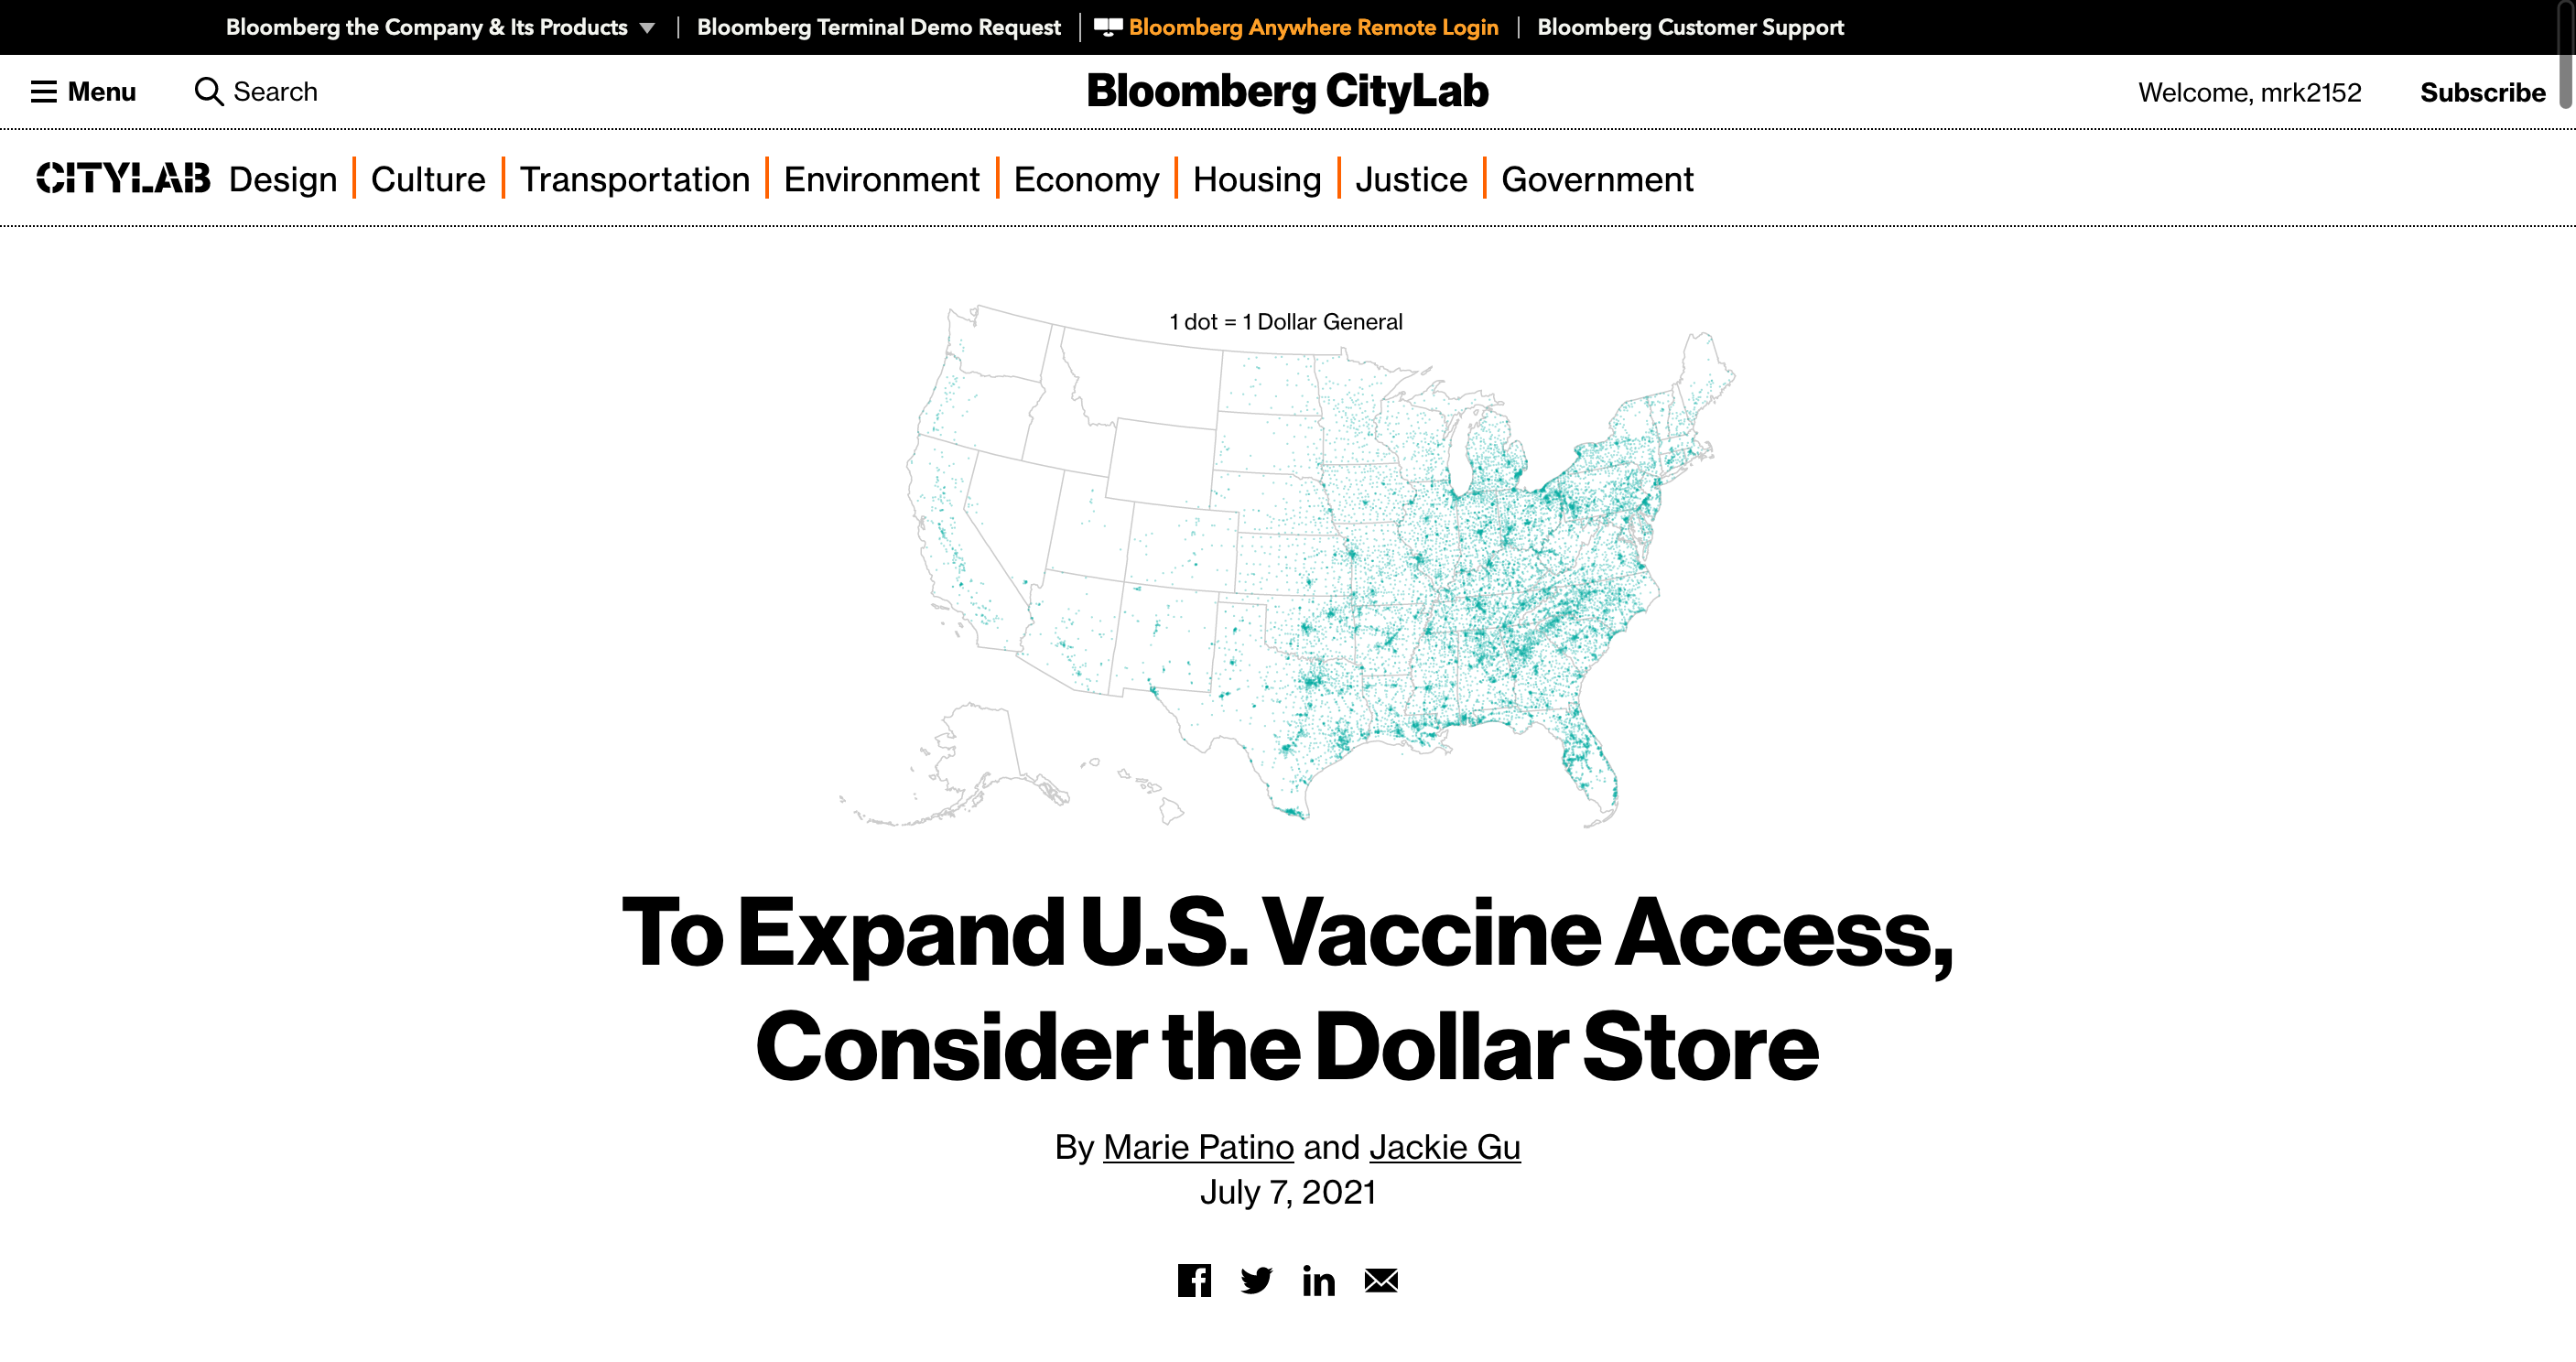 To Expand U.S. Vaccine Access, Consider the Dollar Store